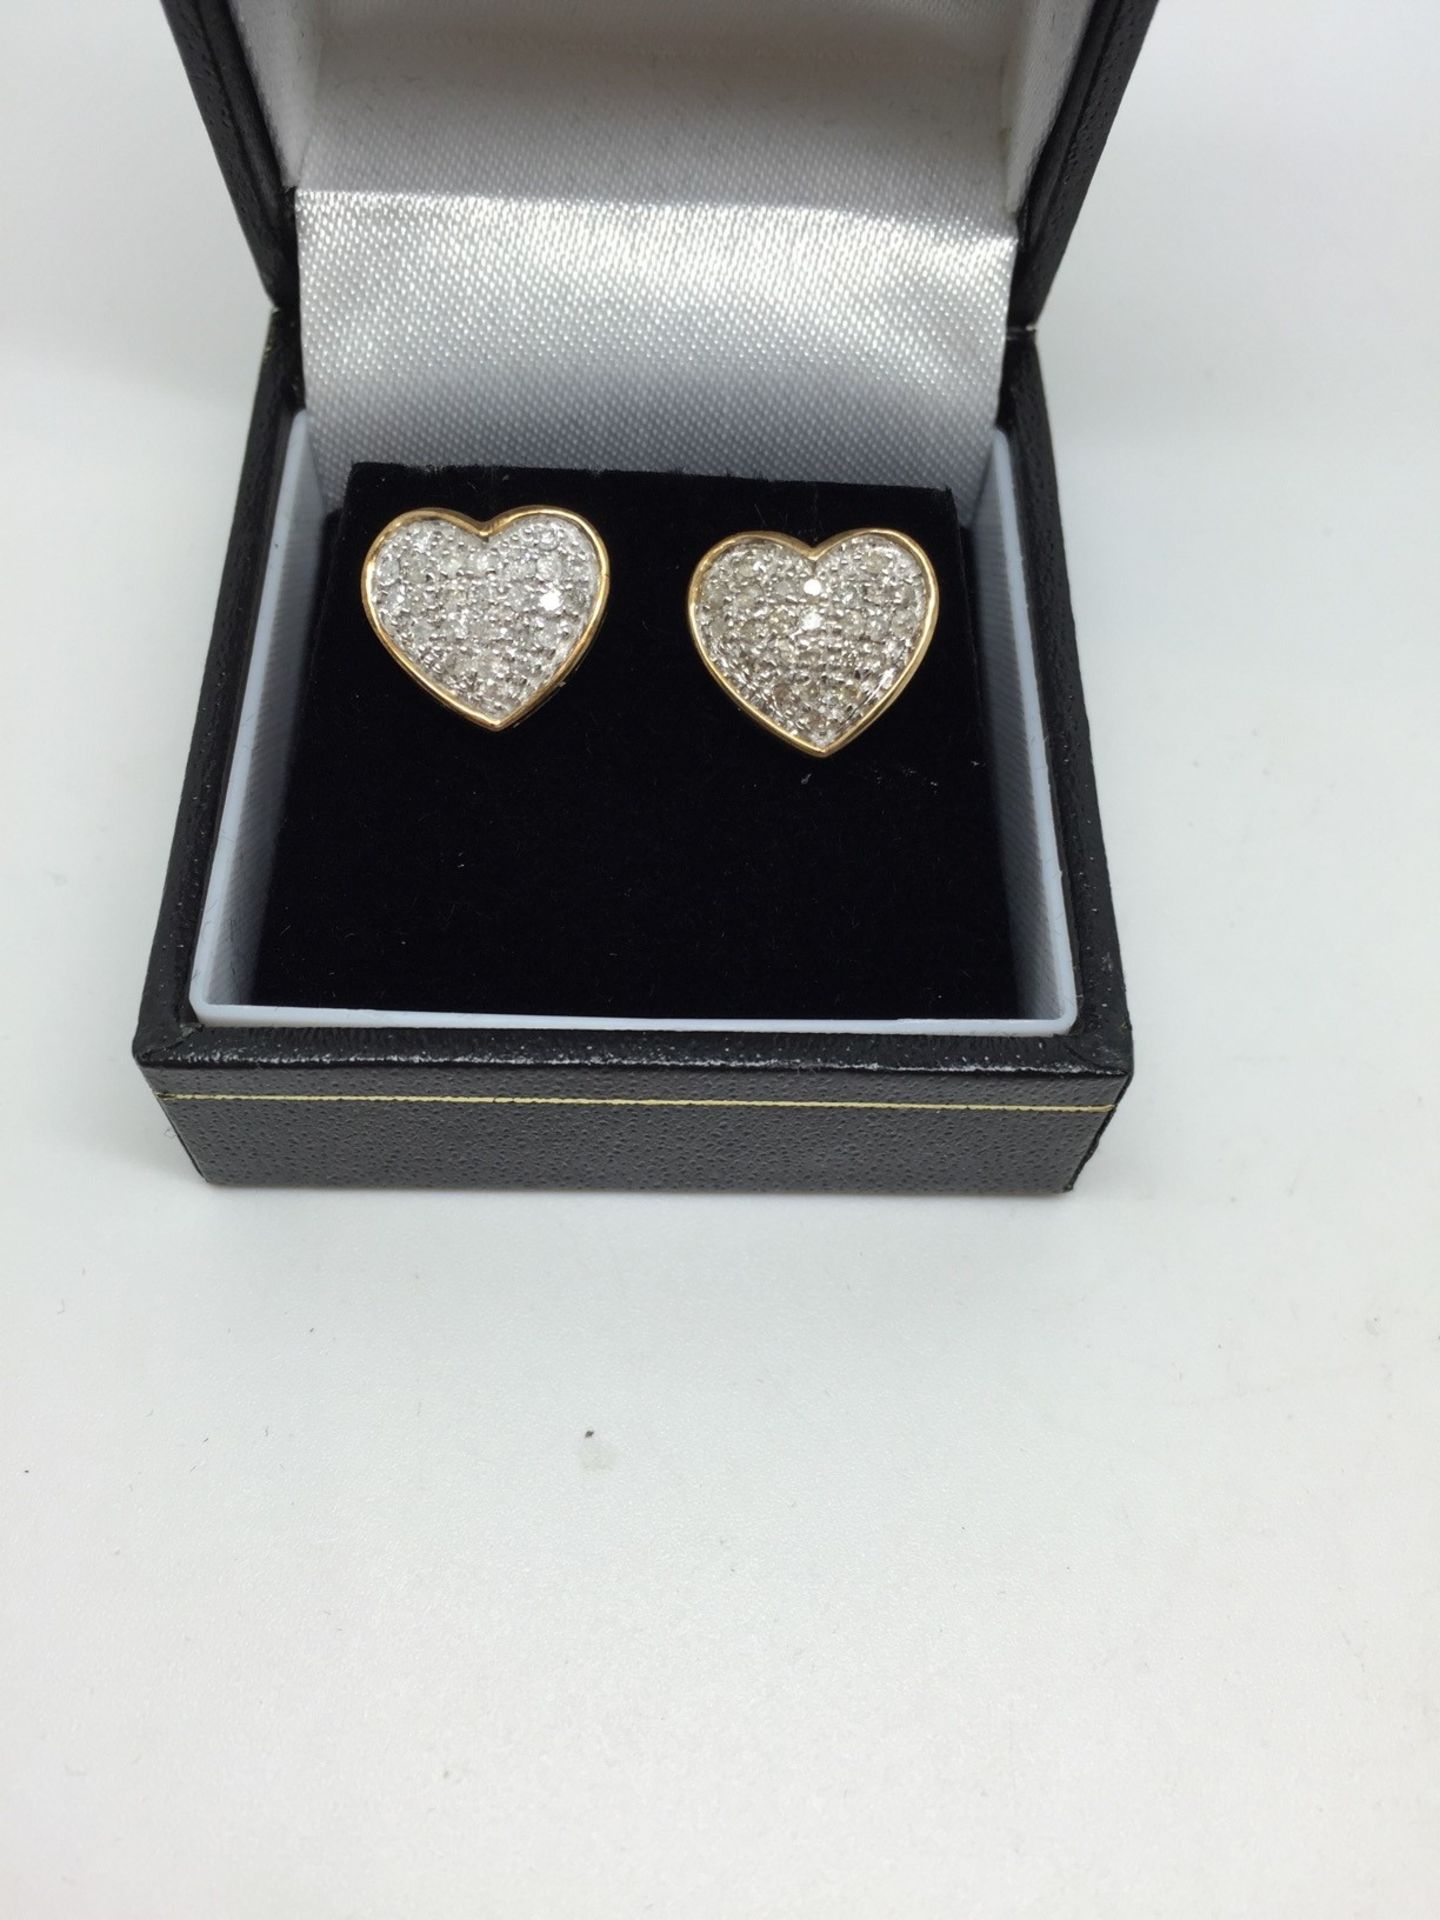 9ct GOLD 50 POINT 1/2ct DIAMOND HEART CLUSTER EARRINGS